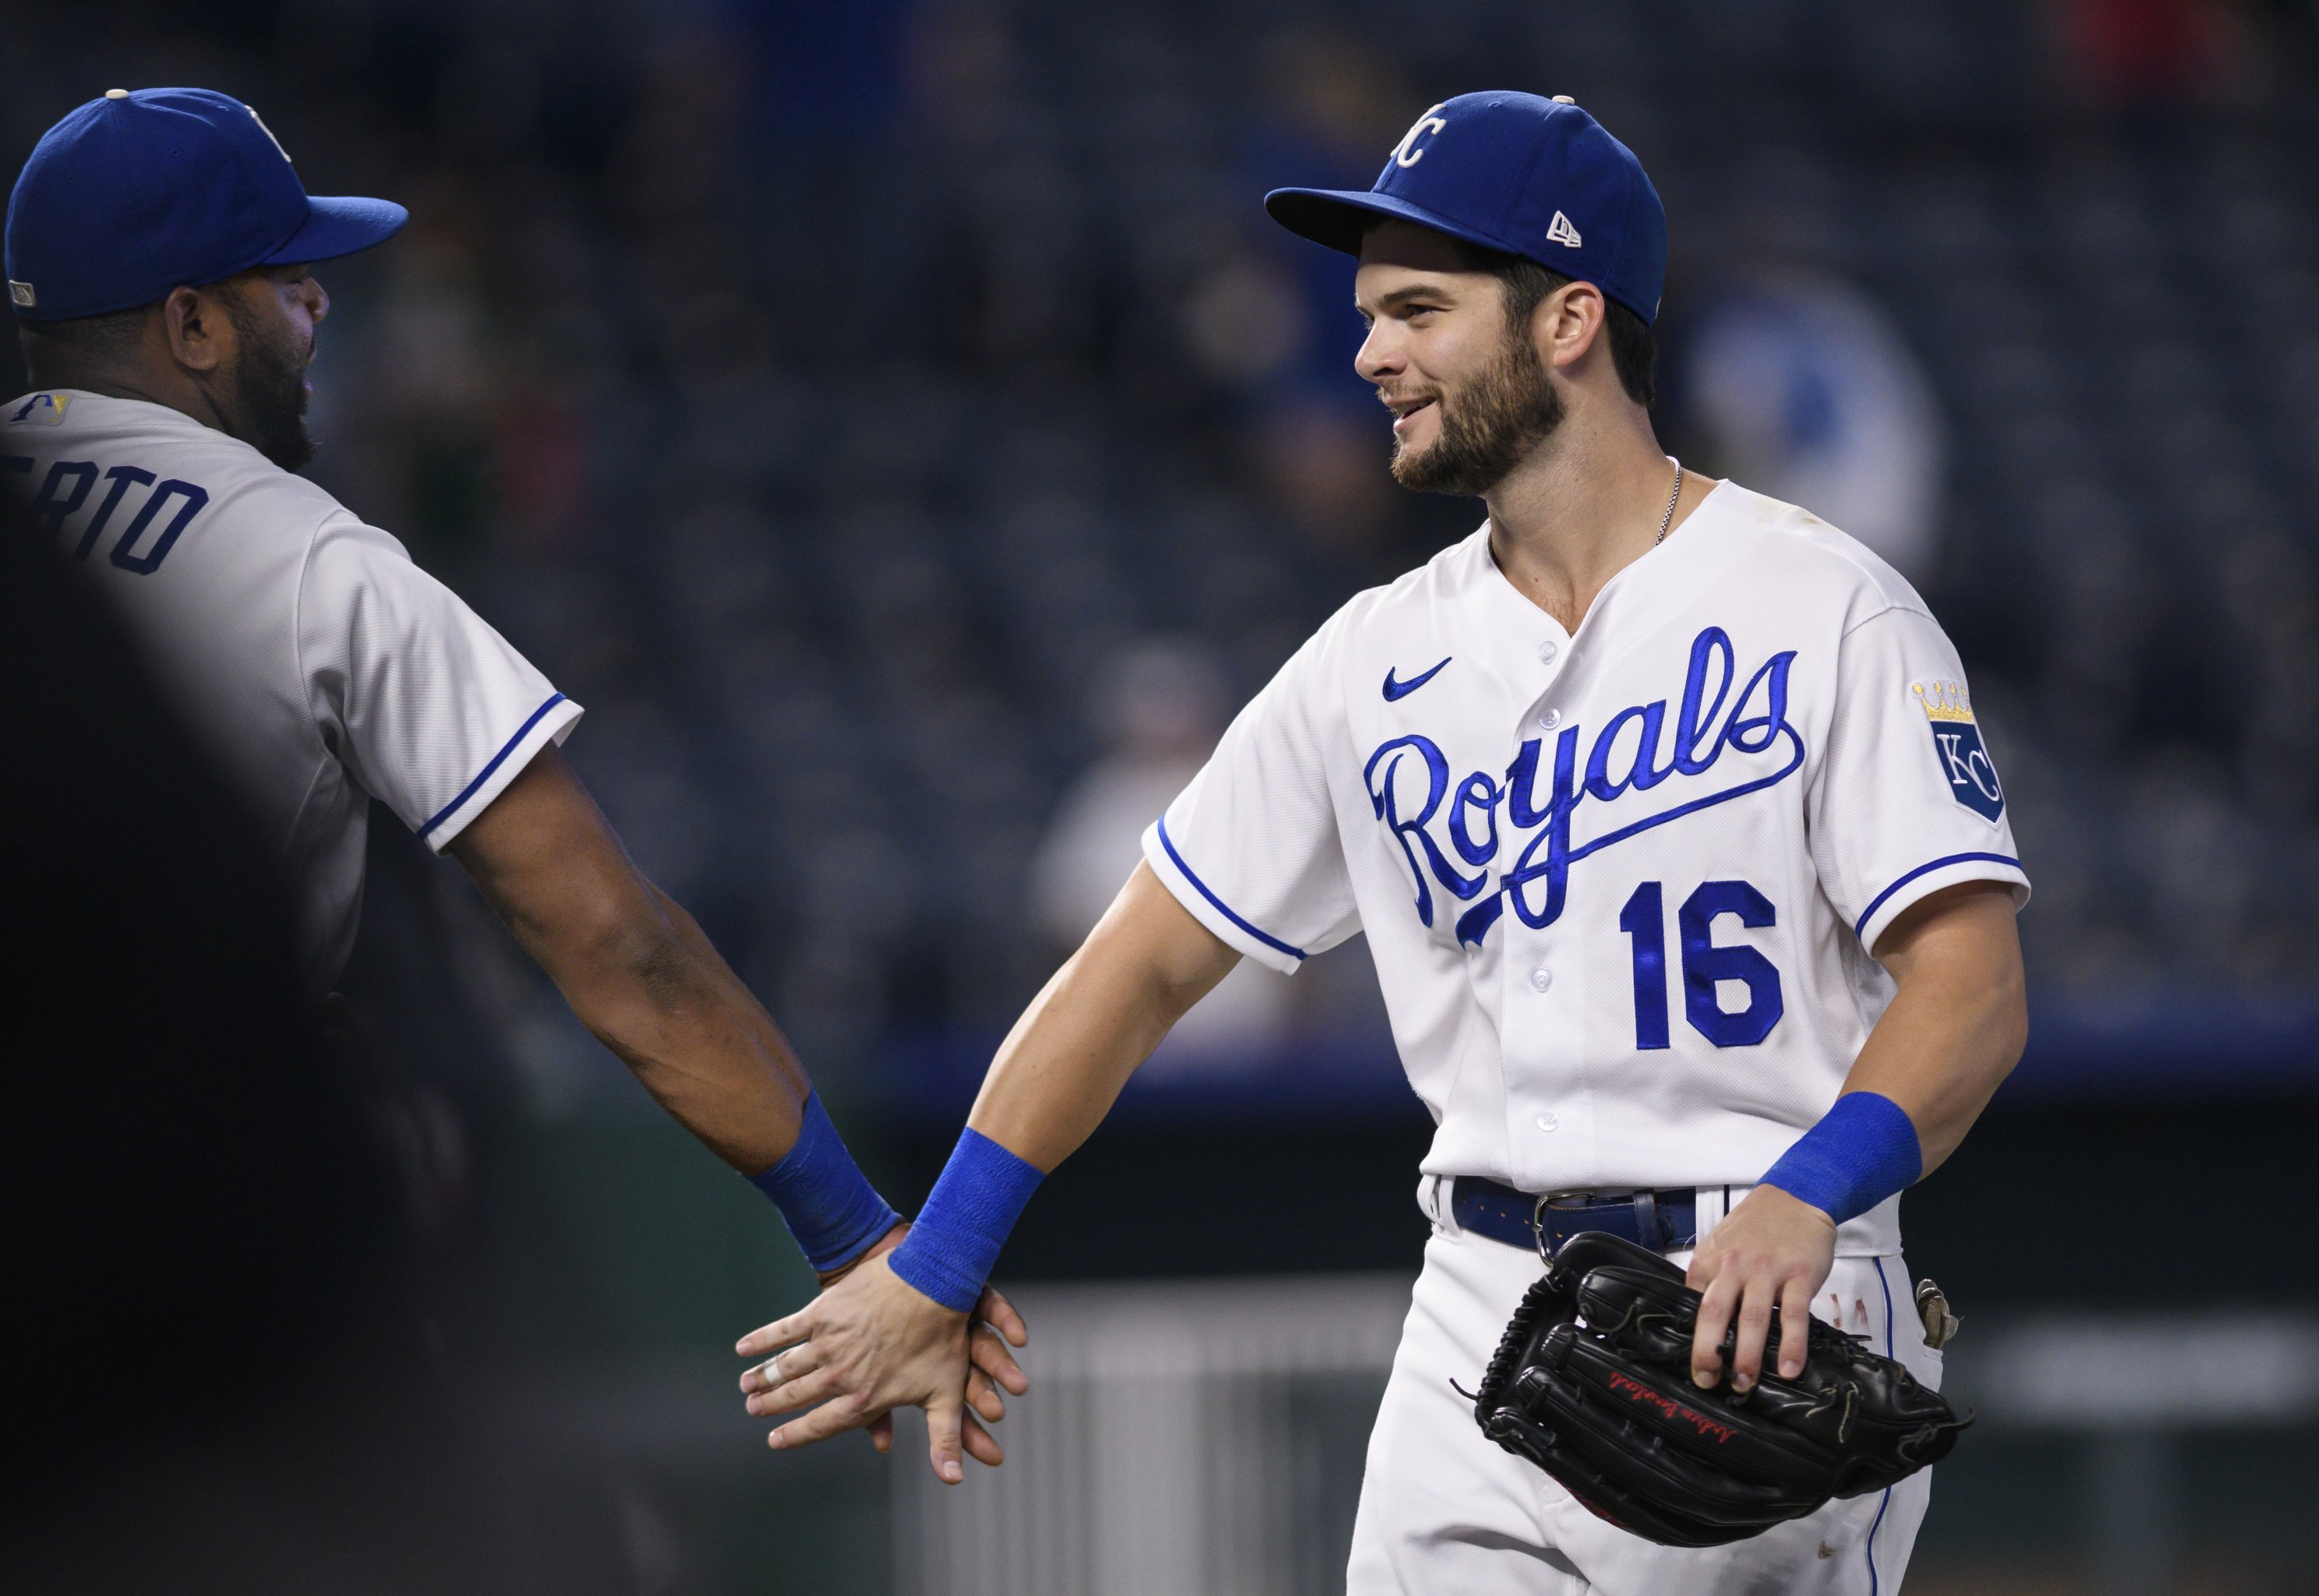 Fantasy baseball waiver wire: Top outfield pickups, adds for Week